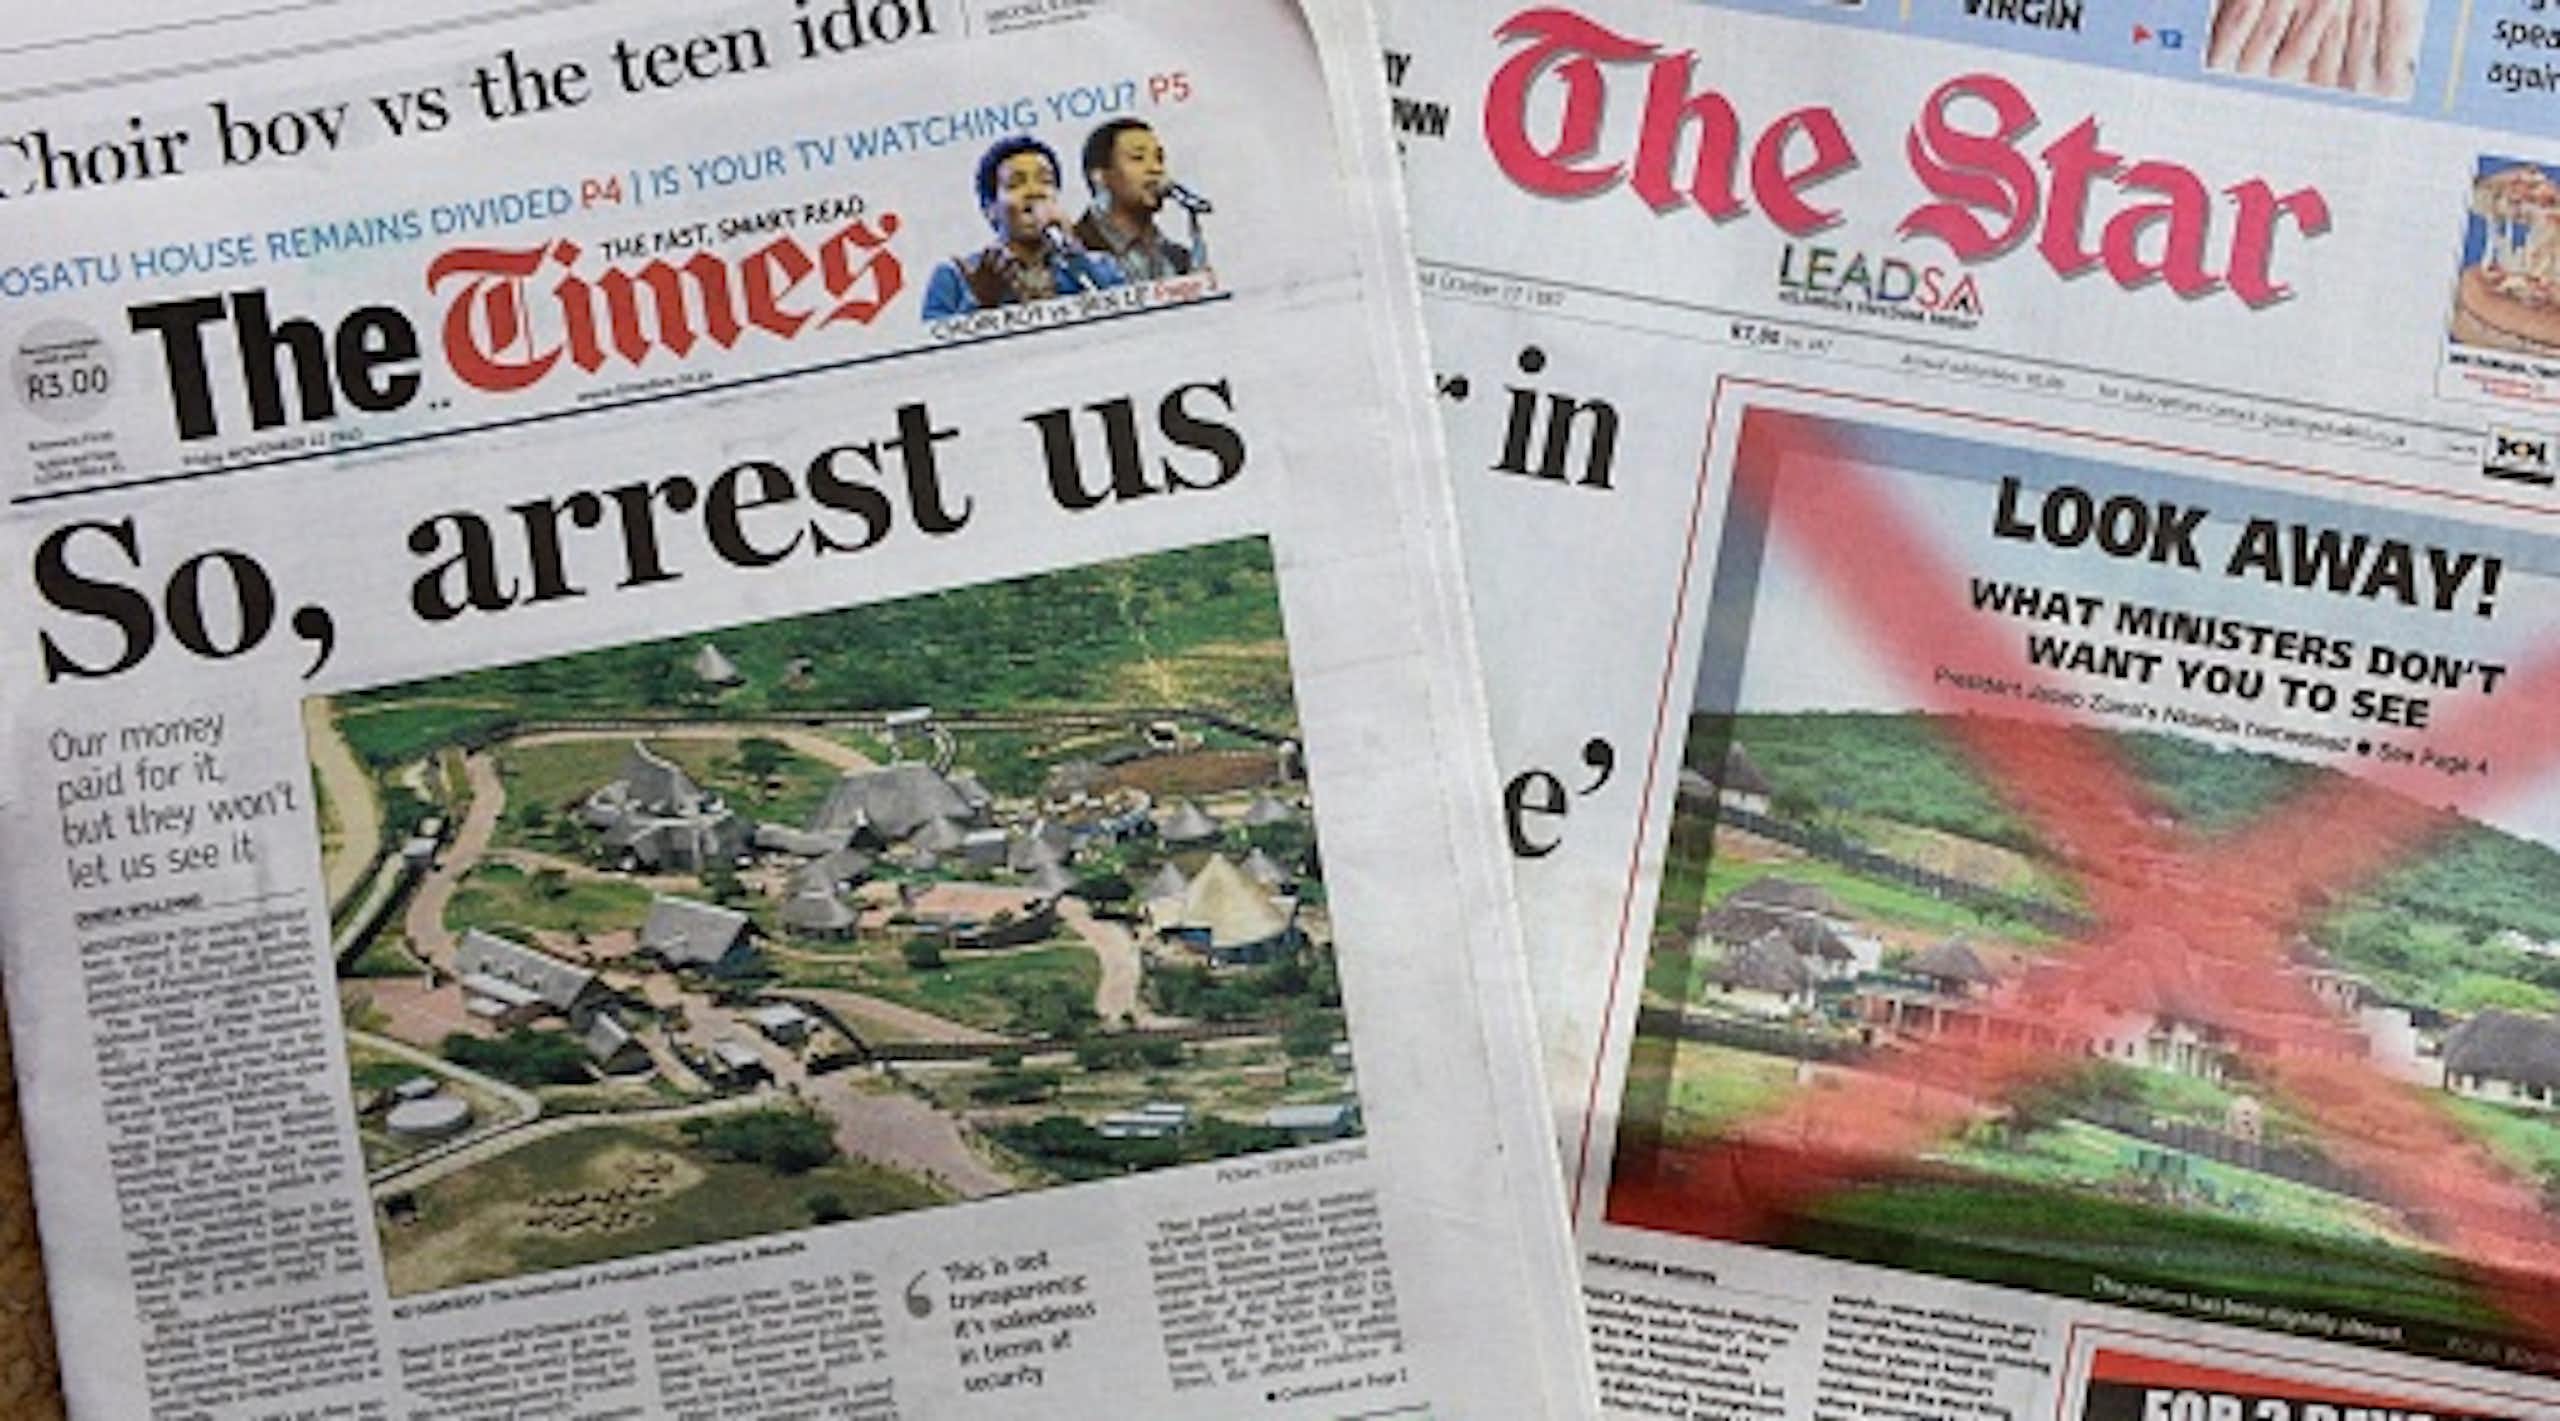 South Africa’s media have done good work with 30 years of freedom but need more diversity